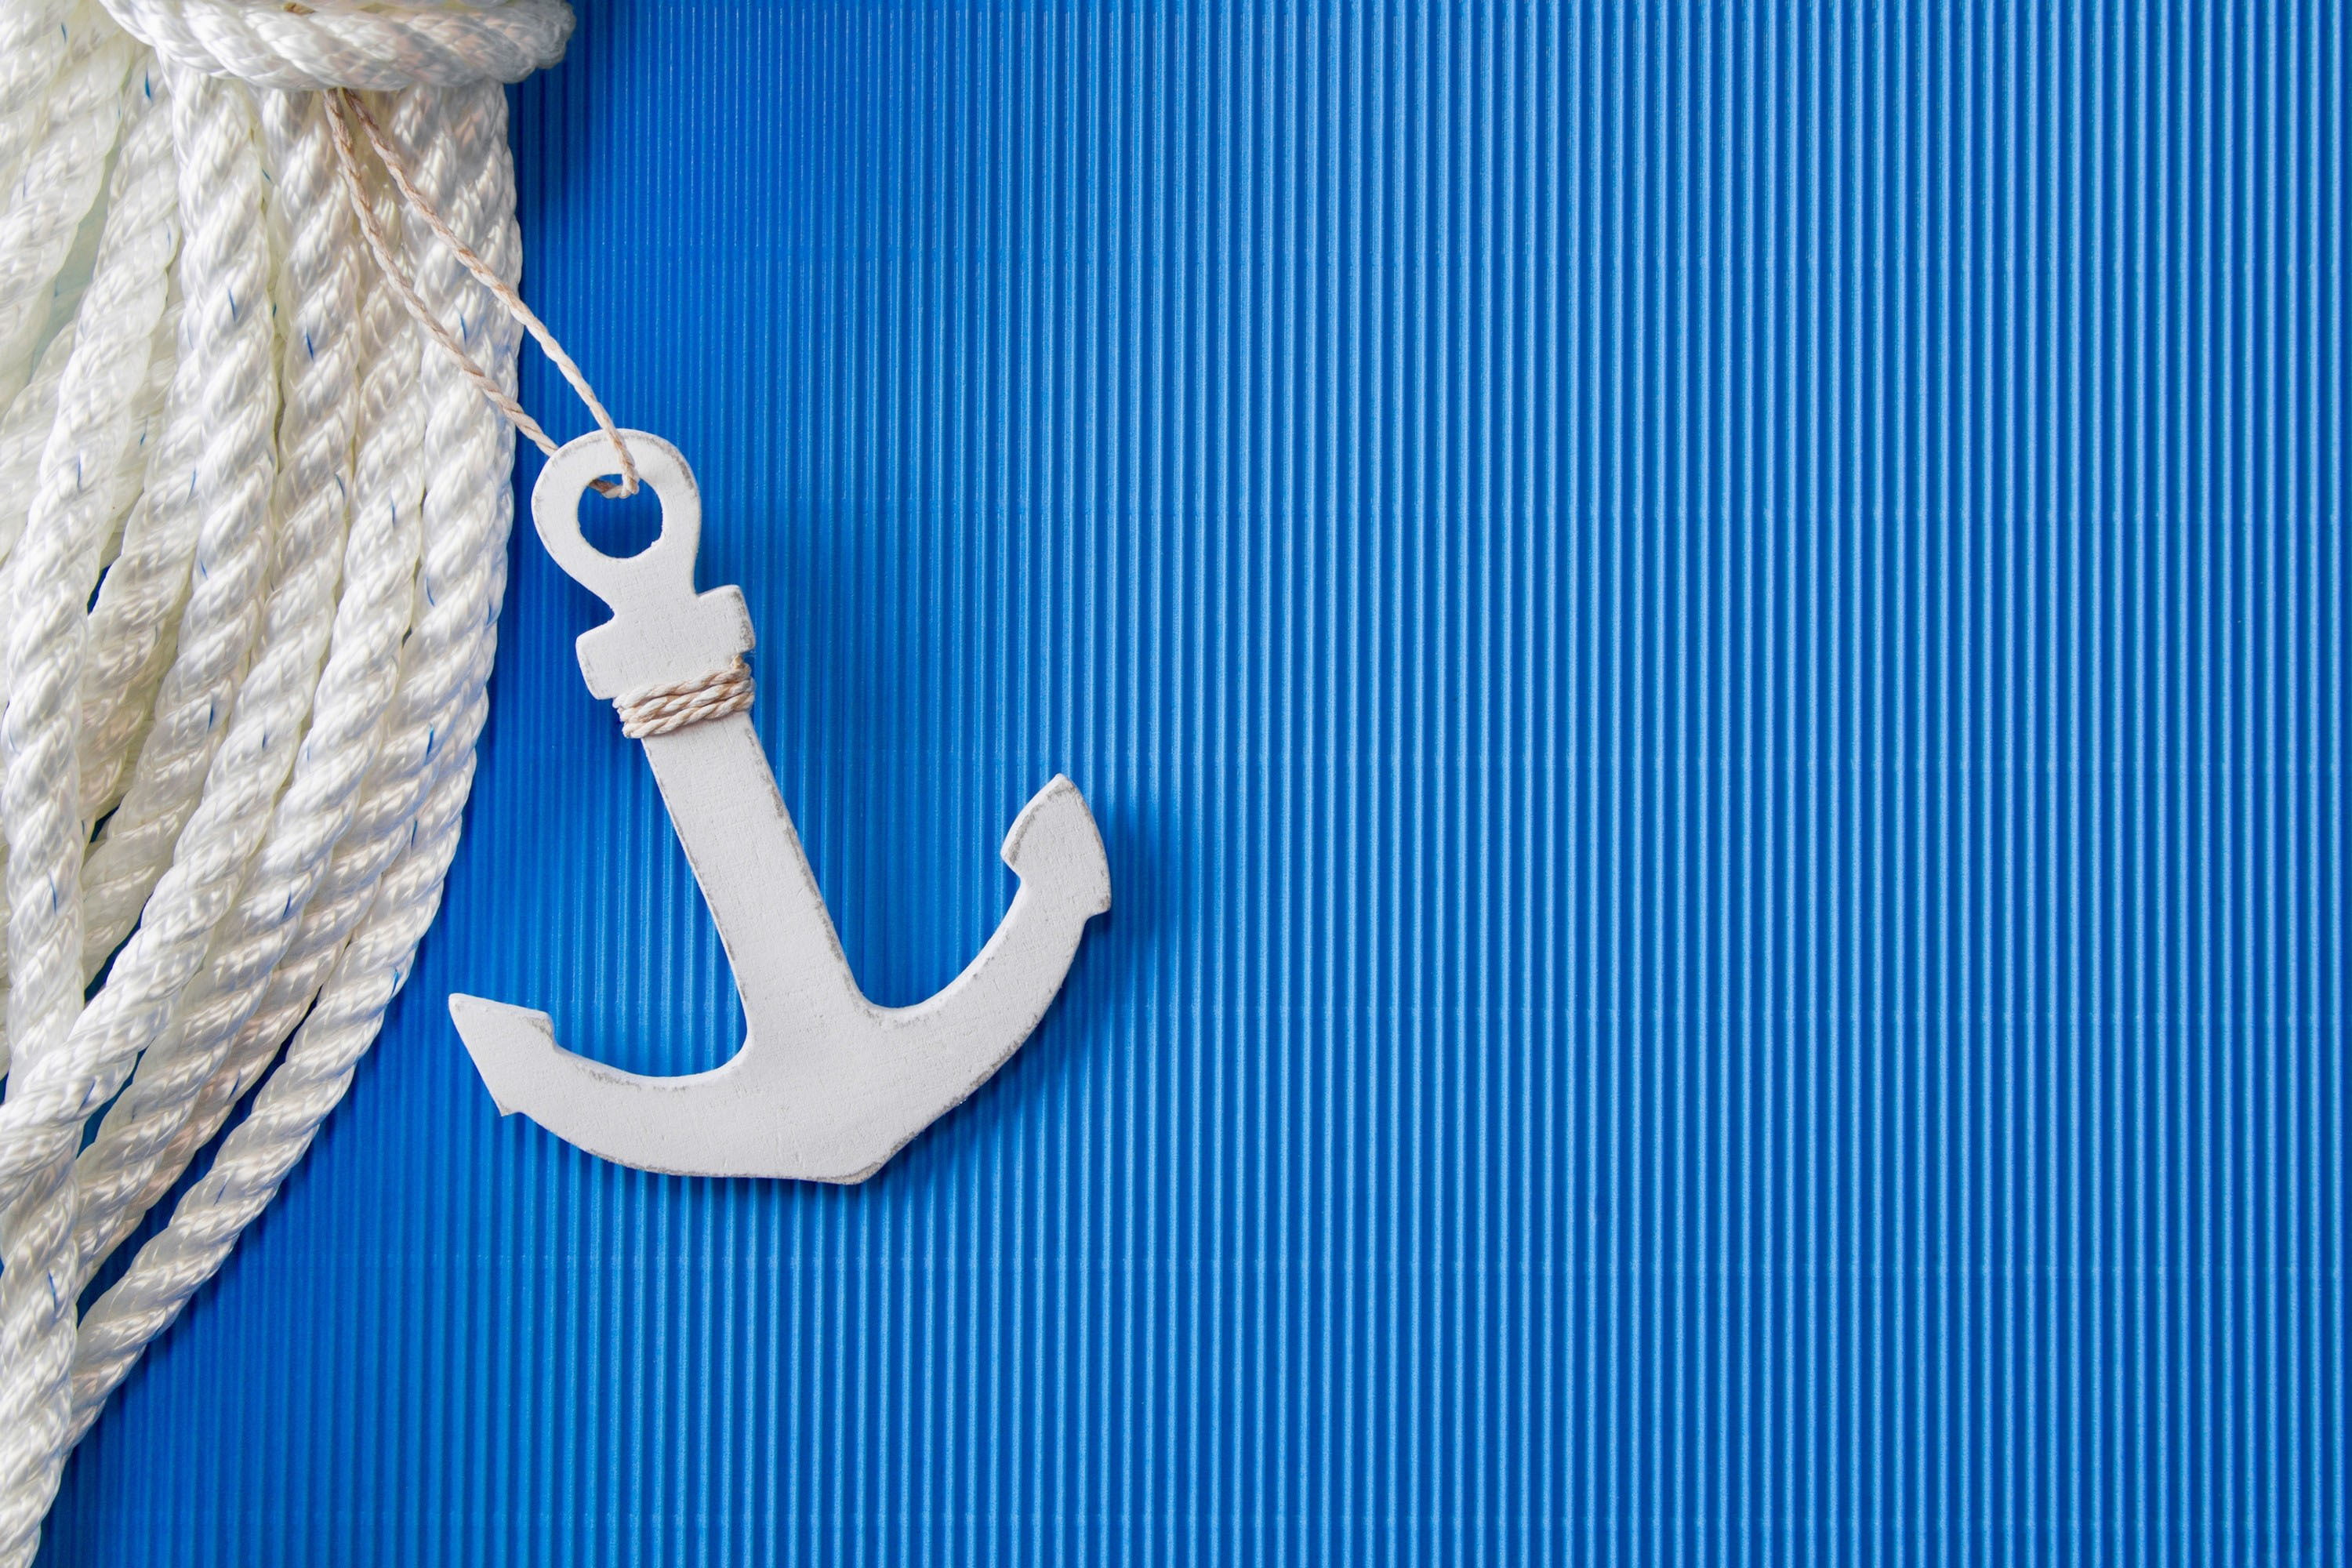 white anchor hanging decor, strip, background, blue, rope, close-up